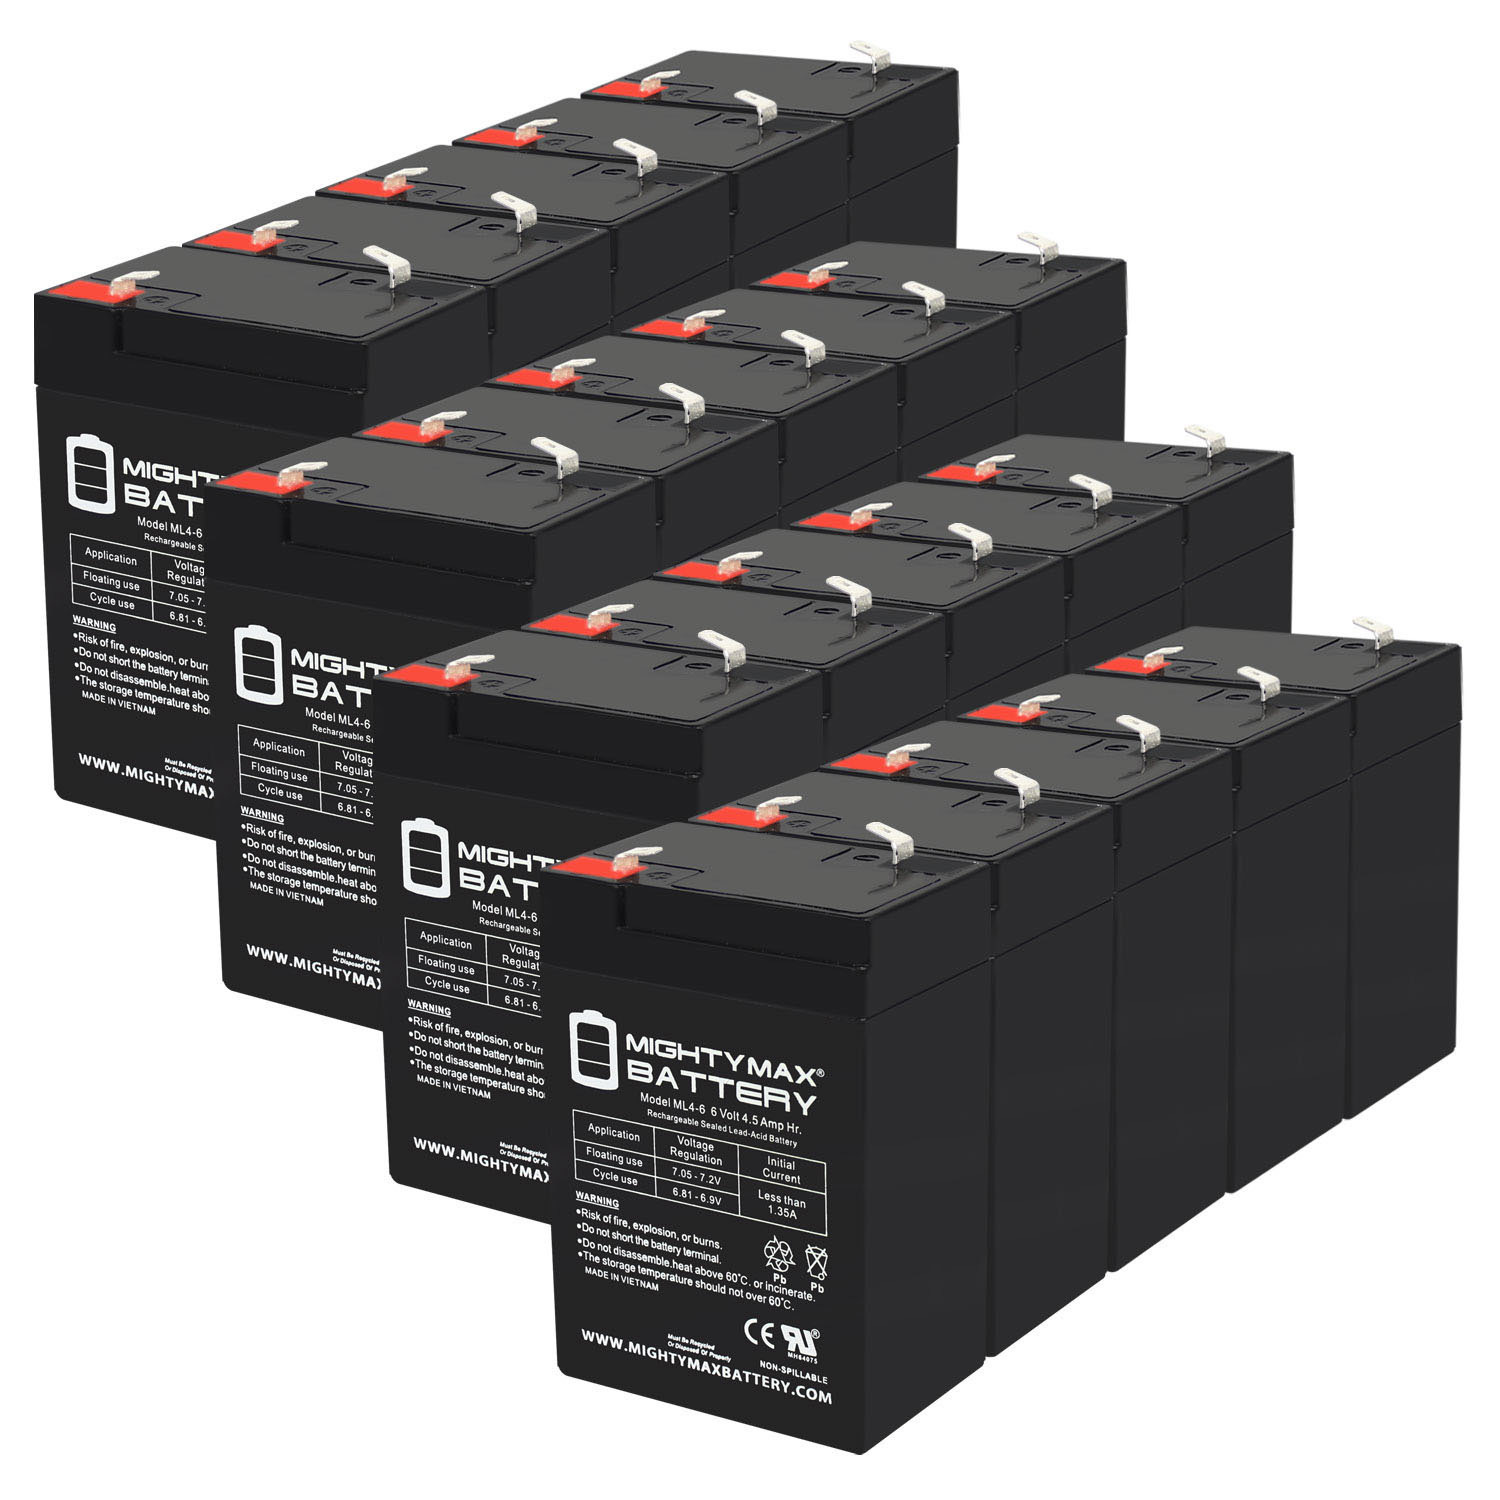 ML4-6 6V 4.5AH SLA Replacement Battery for Big Beam 2CL6S5 - 20 Pack